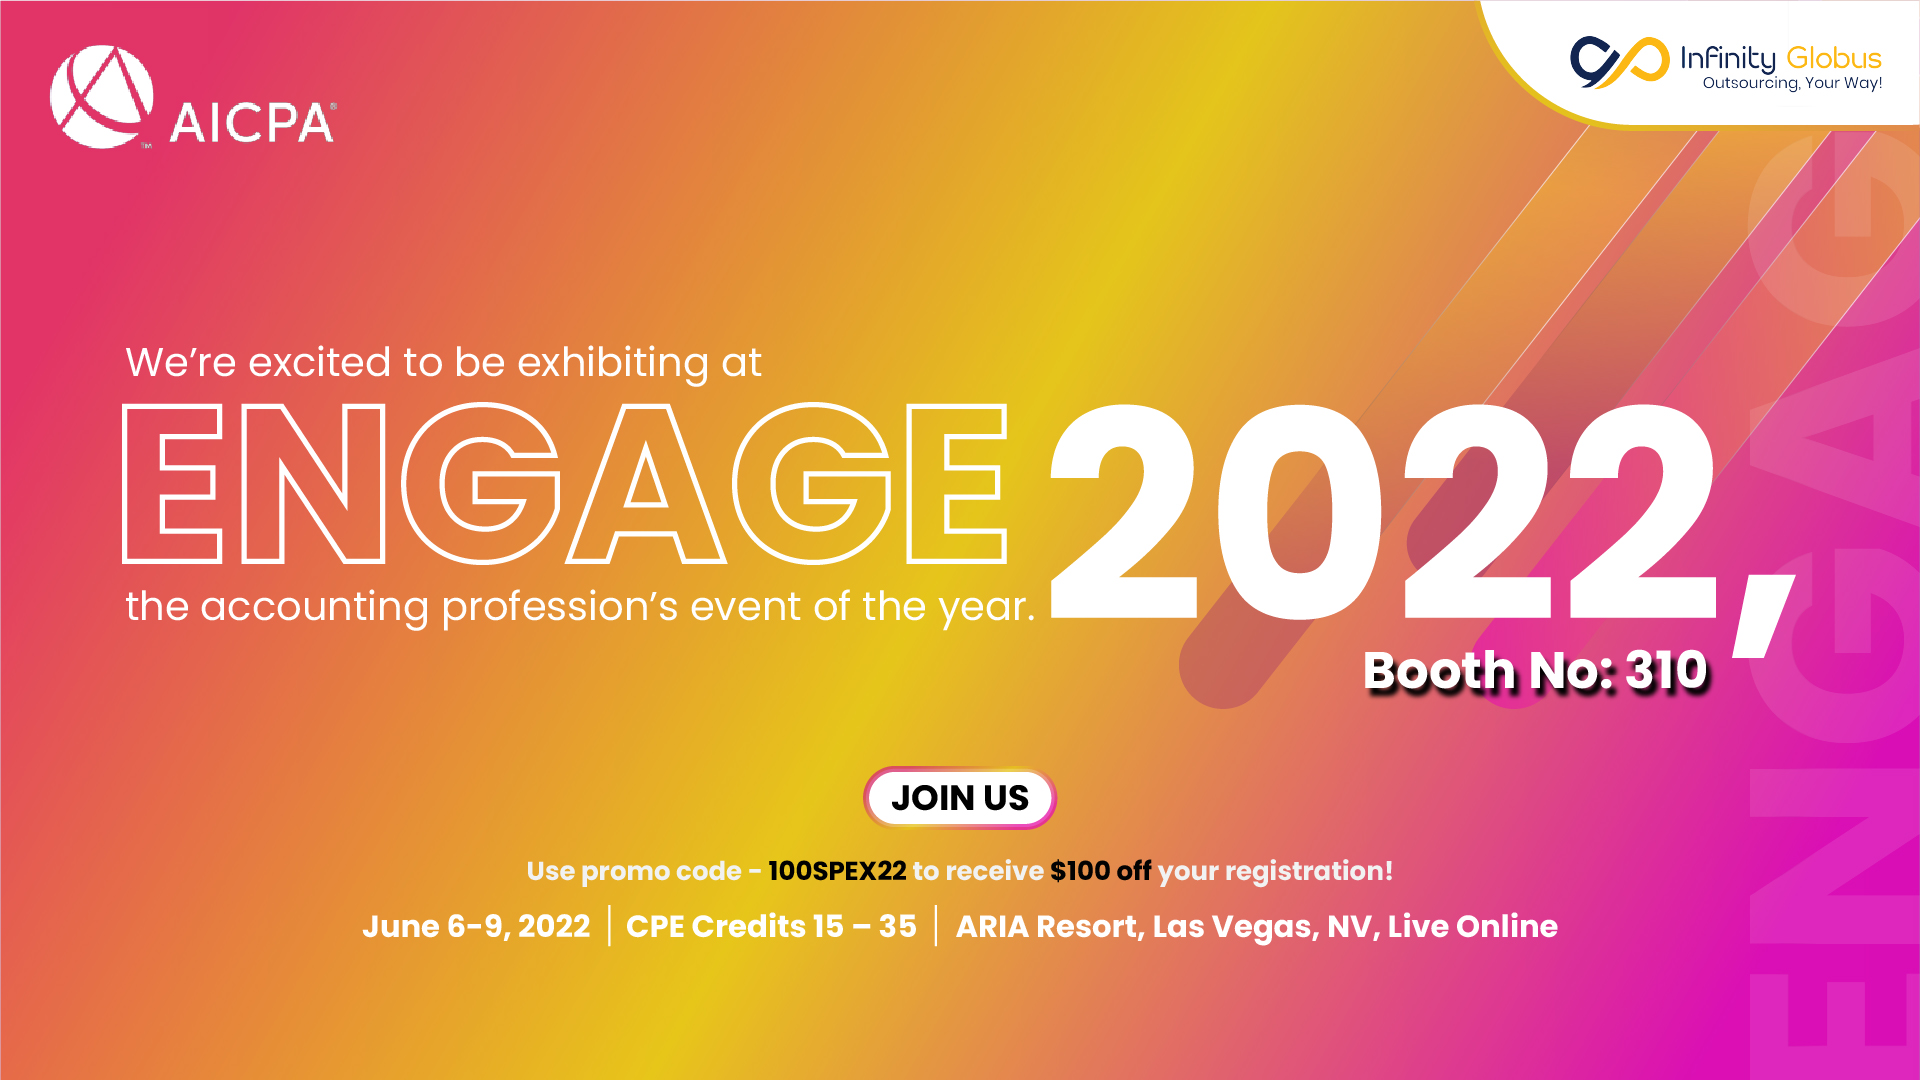 Meet Infinity Globus and Adapt + Thrive at ENGAGE 22, Online Event